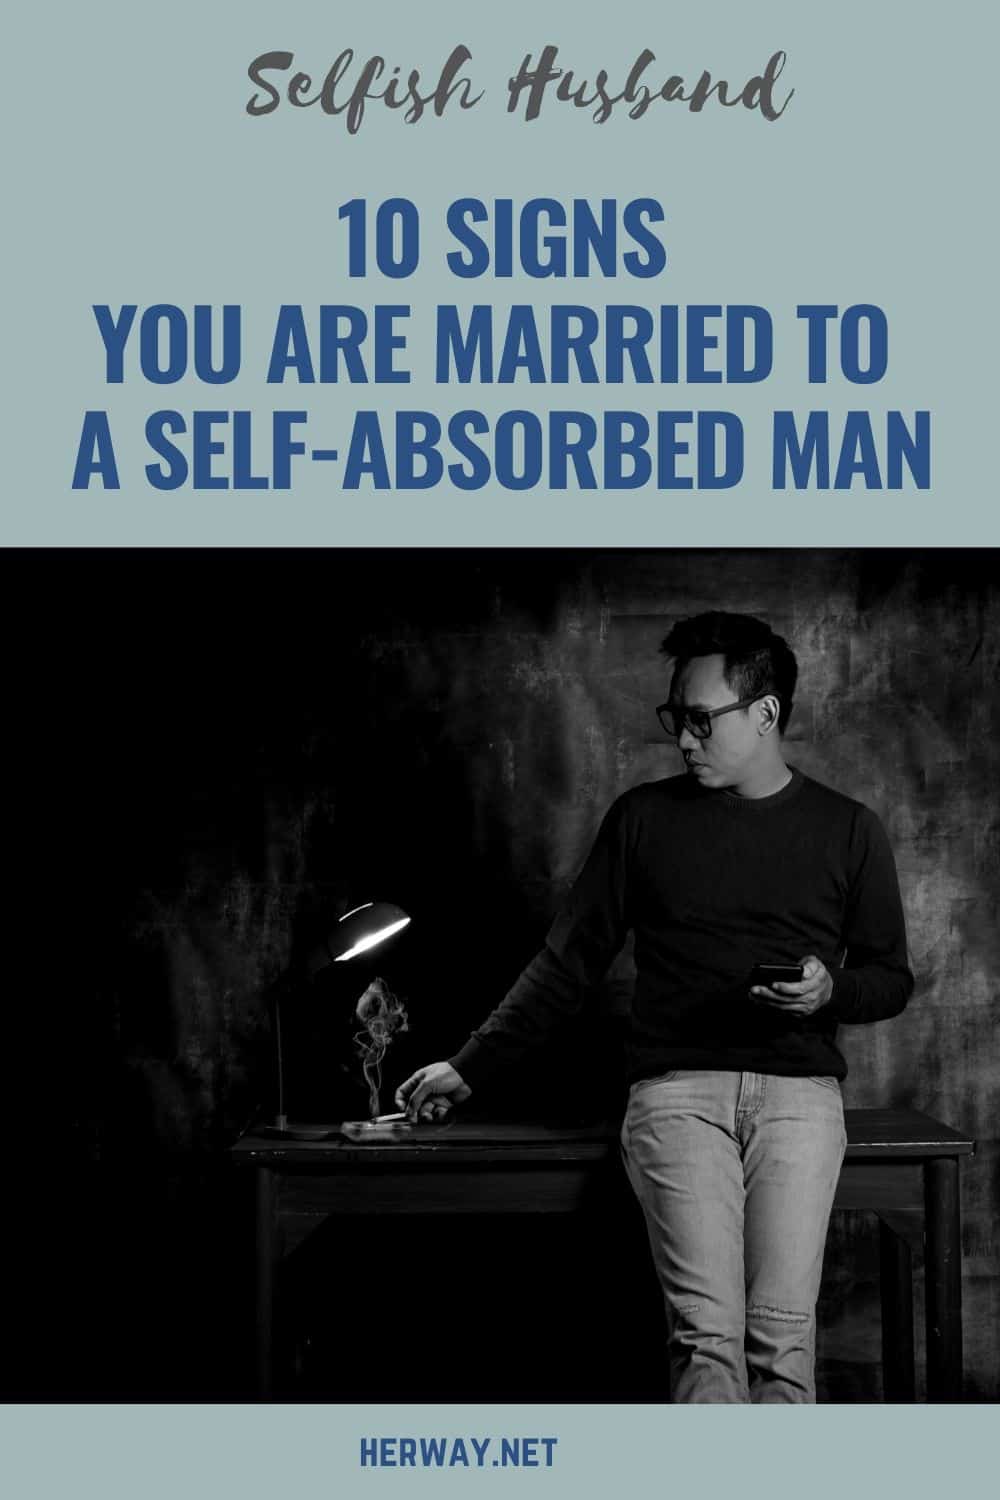 Selfish Husband 10 Signs You Are Married To A Self-Absorbed Man